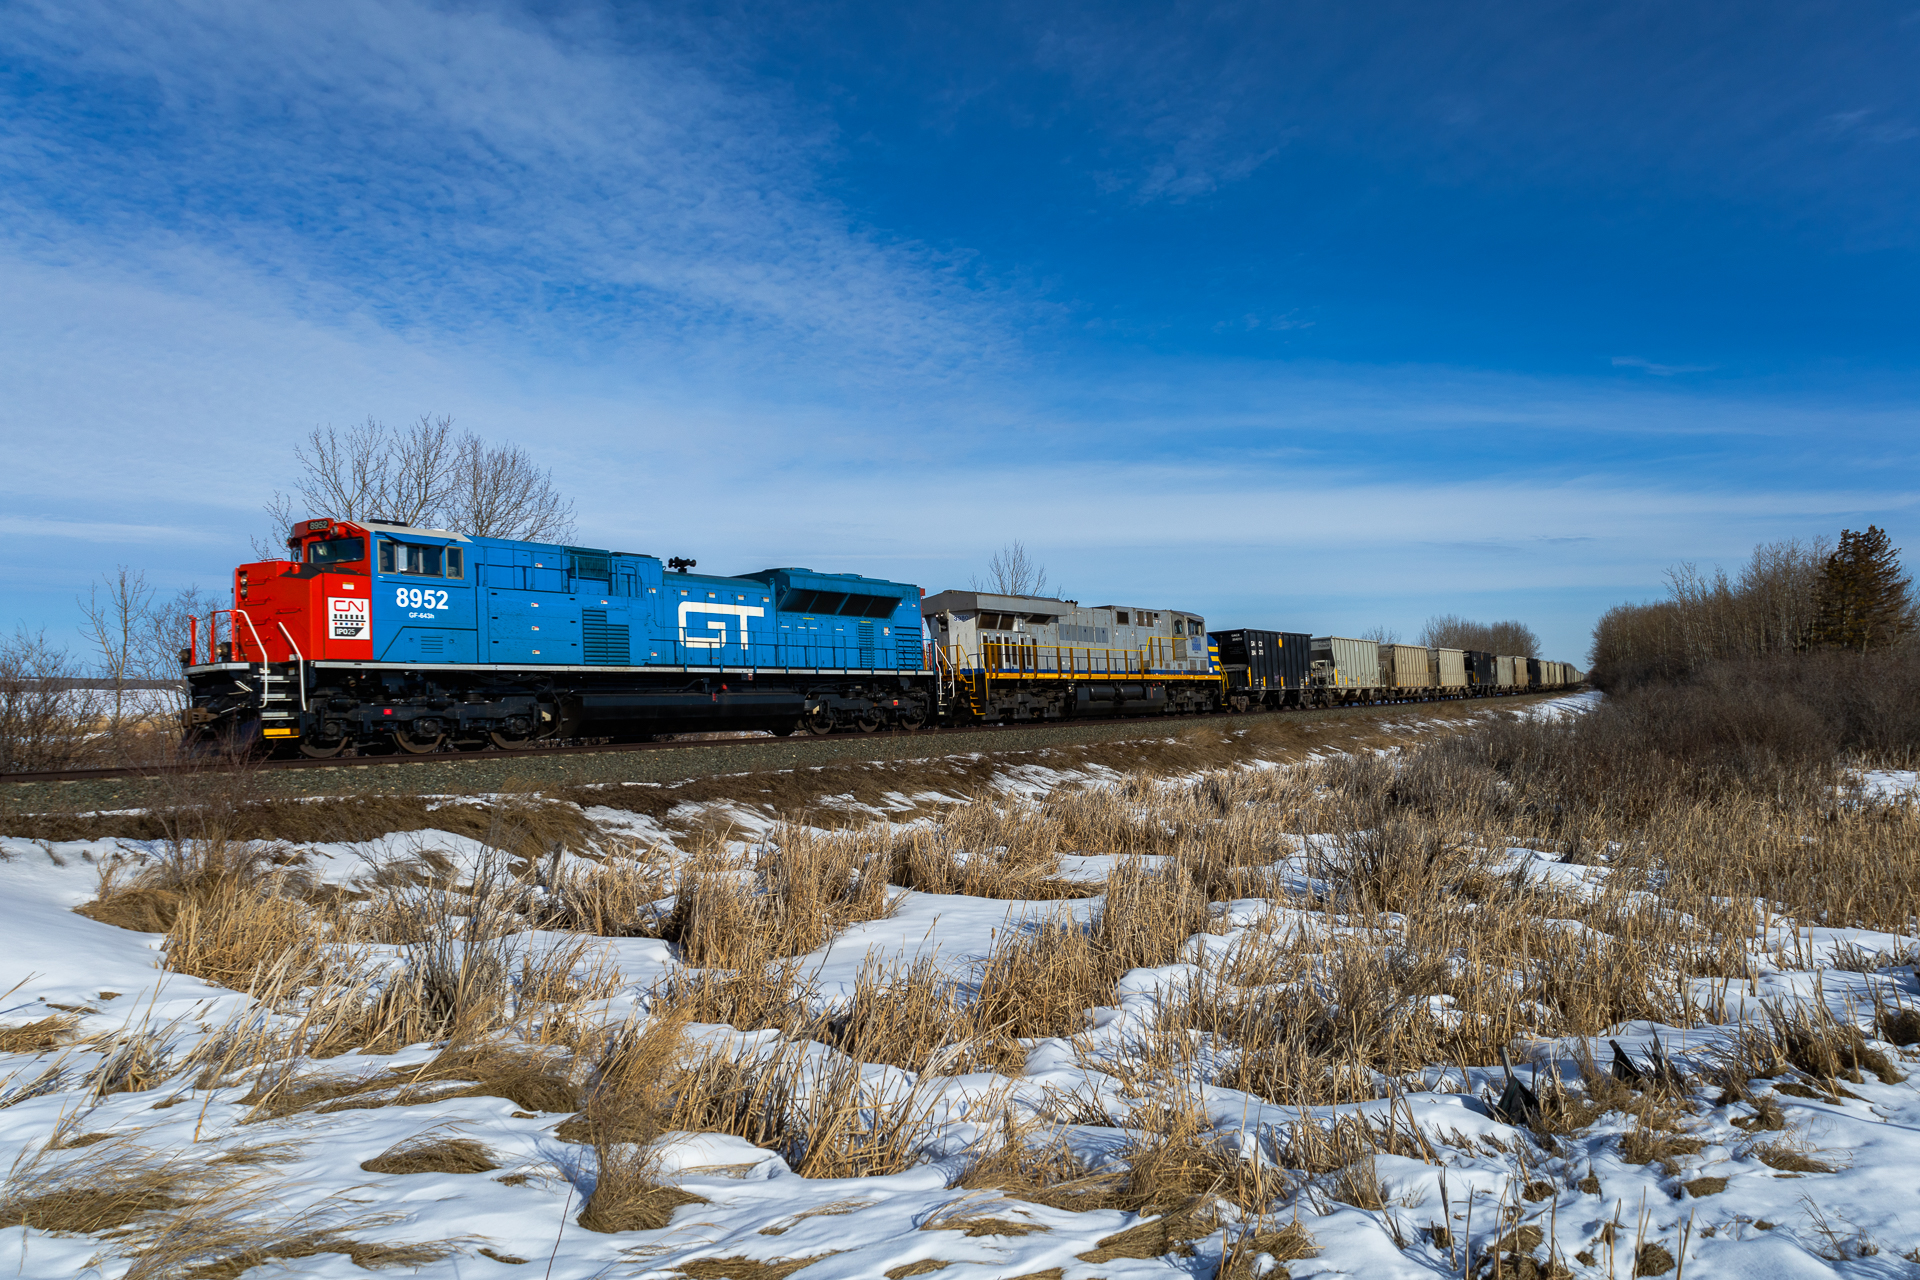 Rob Eull Photo: U 72551 26 has just departed  - Railpictures.ca